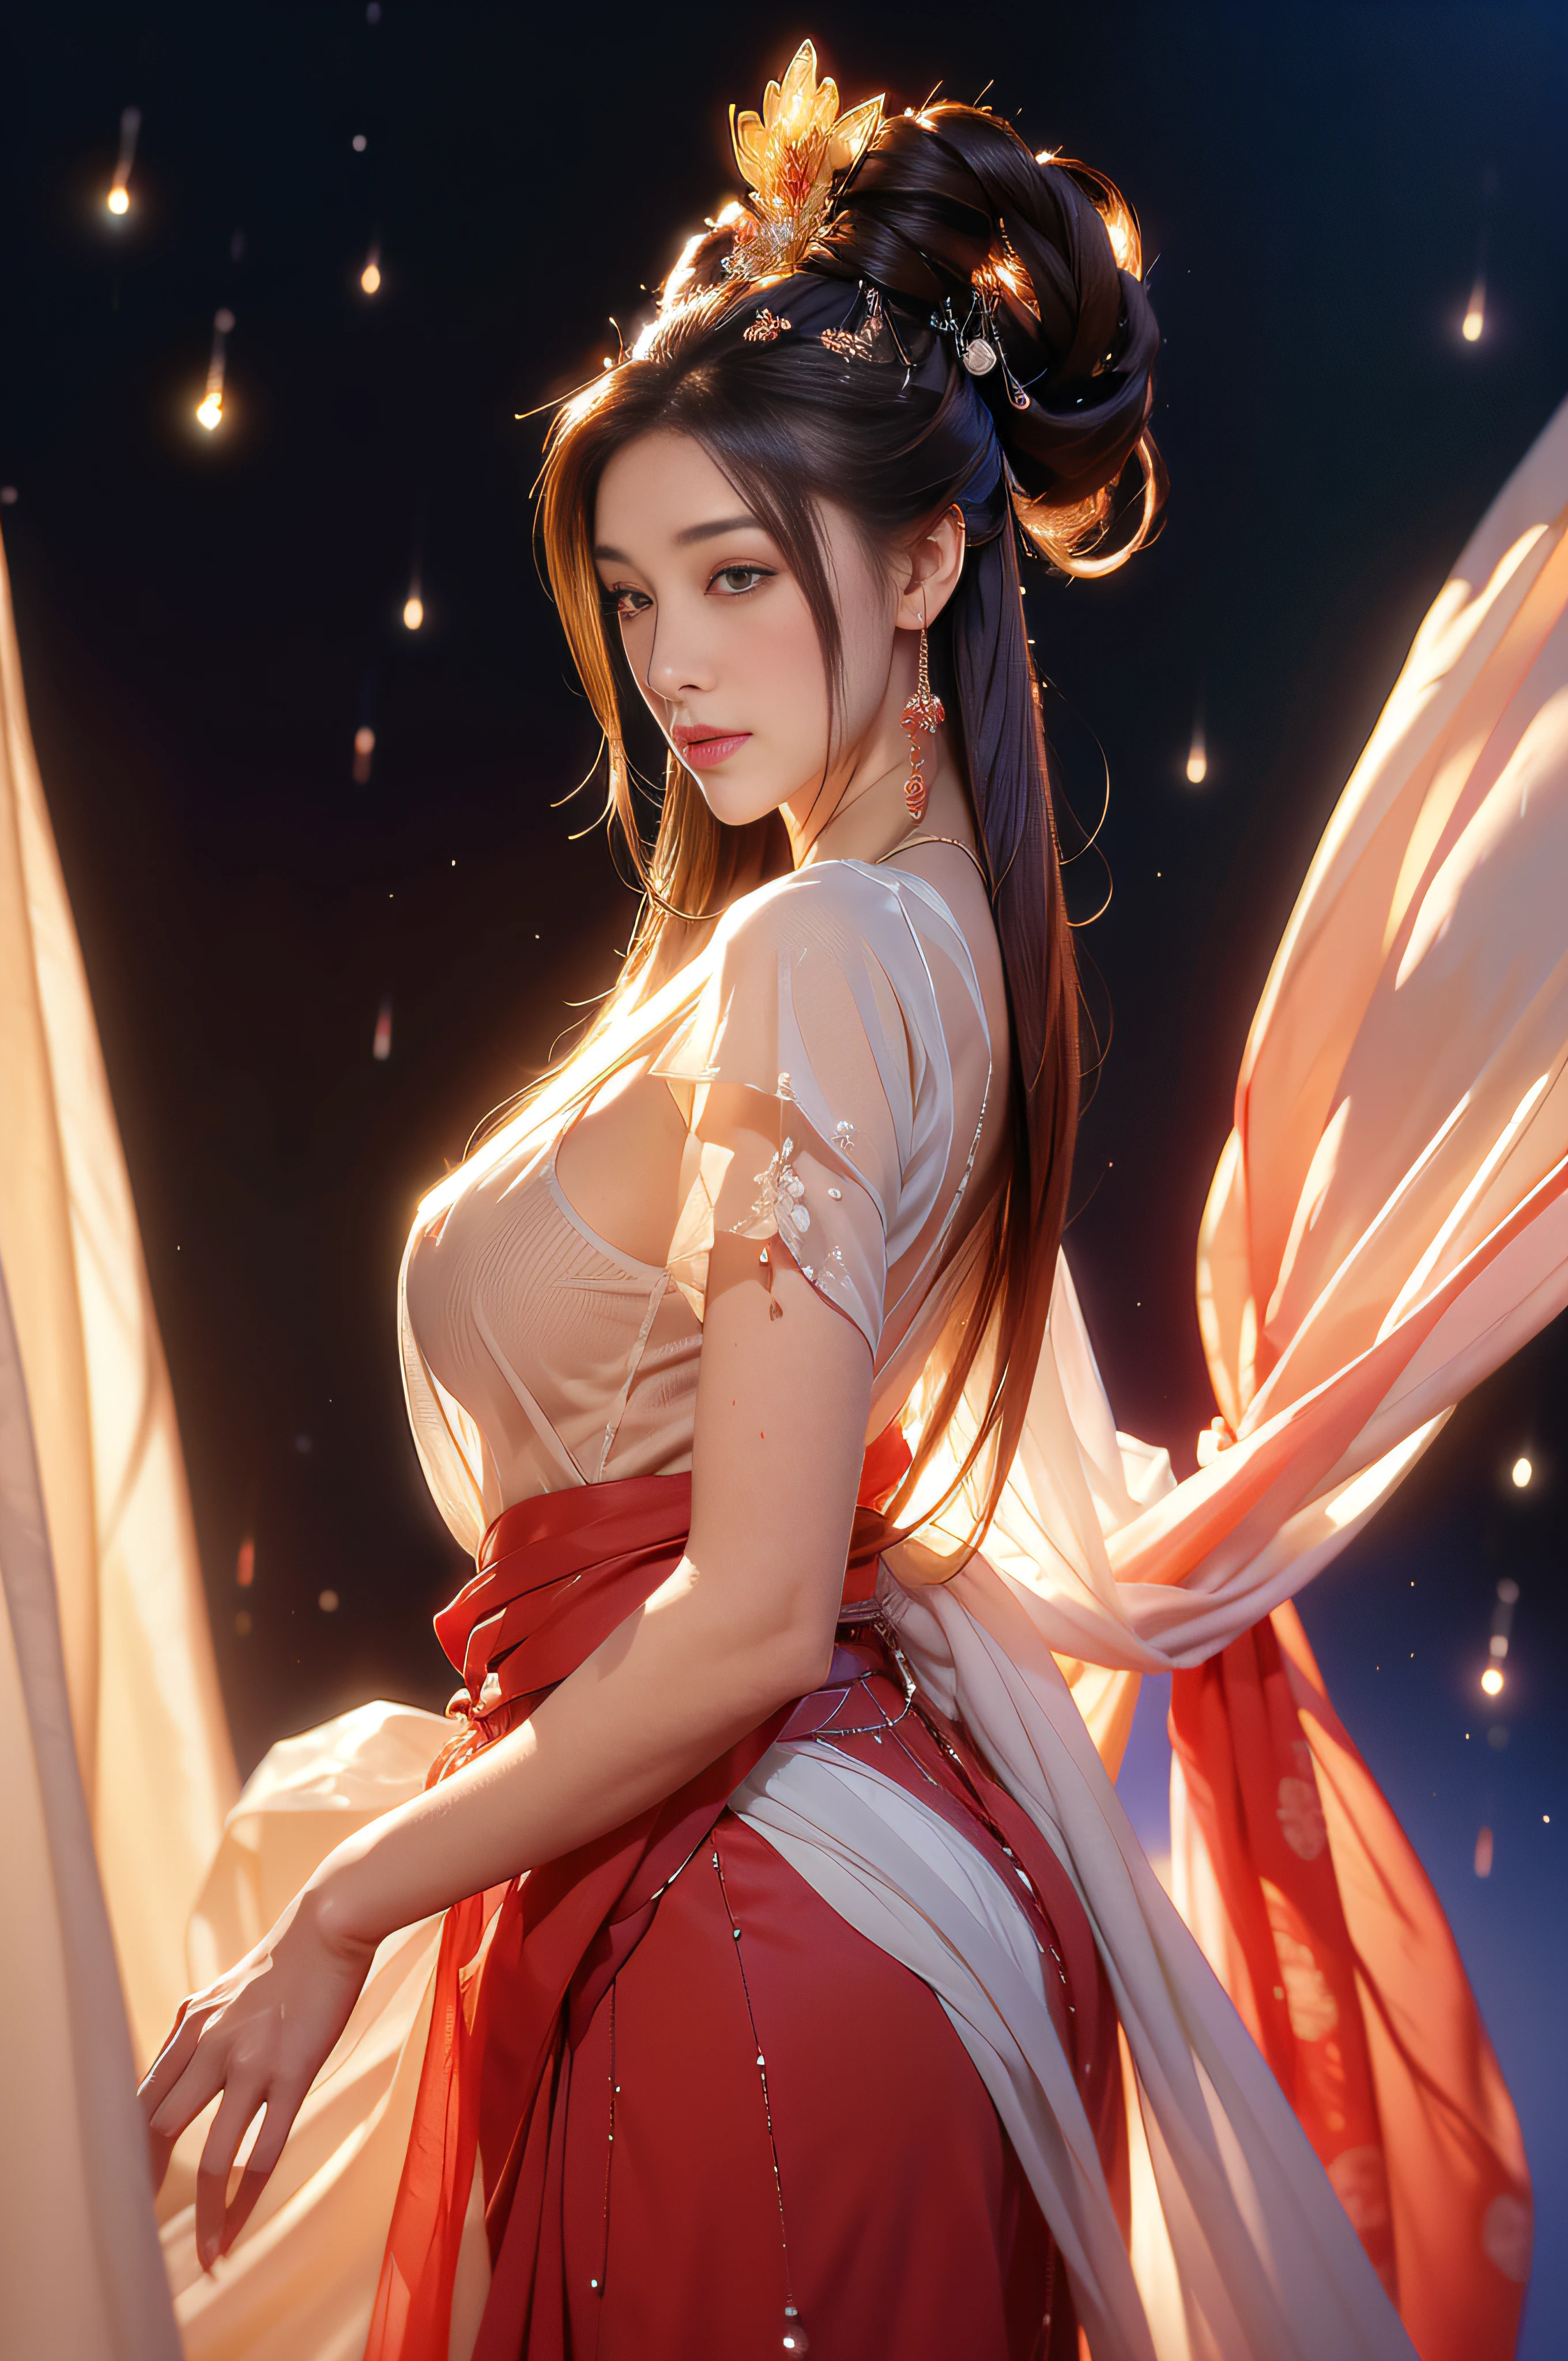 Gilded Chinese Palace,looki at viewer,depth of fields,bokeh dof,light falling,((A MILF))、pregnant woman、Red dress
Transparent underwear、one-girl、Red shirt、a black skirt、huge-breasted、
with brown eye、(long whitr hair、brunette color hair、Very straight hair:1.4、hime-cut:1.4)、Earrings necklace、pouty、
A picture、tmasterpiece、top-quality、NFFSW、A high resolution、realistic detail、glistning skin、Mature figure、Plump body、crisp breasts、perfect bodies、wide waist、Extremely colorful、looking at viewert、hyper realisitc、From the front side、watercolor paiting、Traditional media、(color difference、intricately details)、dynamicposes、dynamic ungle、
40k、NFFSW、A high resolution、From the angle from below、ancient Chinese costume、Ancient Chinese hairstyle、Upward hairstyle、The whole body is dressed in white silk cloth、（Close-up of raindrops in the air, Capture the world with raindrops, Distorted reflections, refracted light, The microscopic world inside each droplet, Miniature landscape, inverted image, Ethereal beauty, pause moments, translucent sphere, Distorted reality, Kaleidoscope view, Natural lenses, A glimpse of the present, Miniature world, Raindrop Symphony, Natural interoperability, 1girl in
, masutepiece, (Dynamic Angle:1.2)）